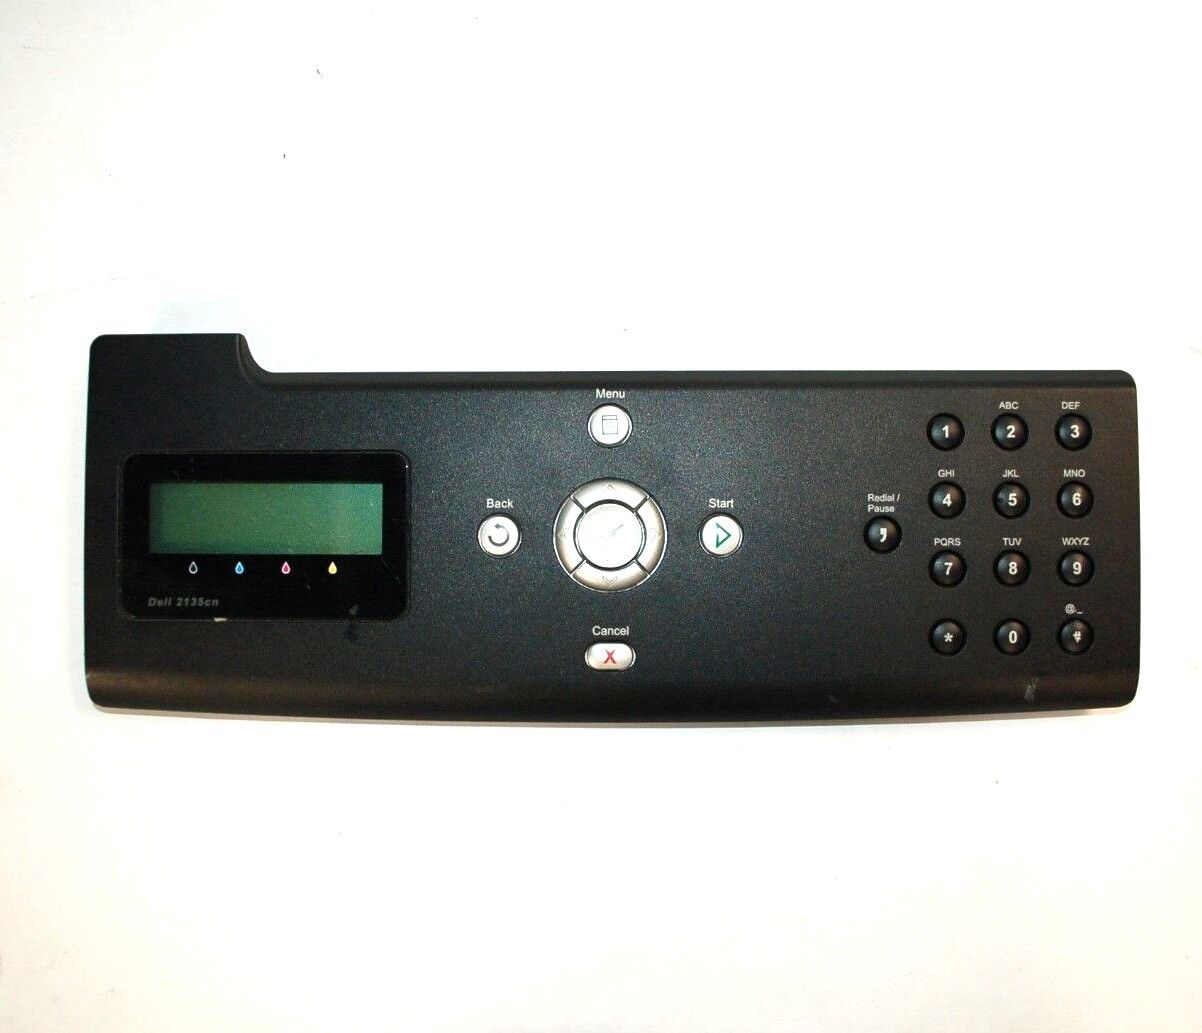 DELL 2135CN Printer Control Panel with Display Screen P374C